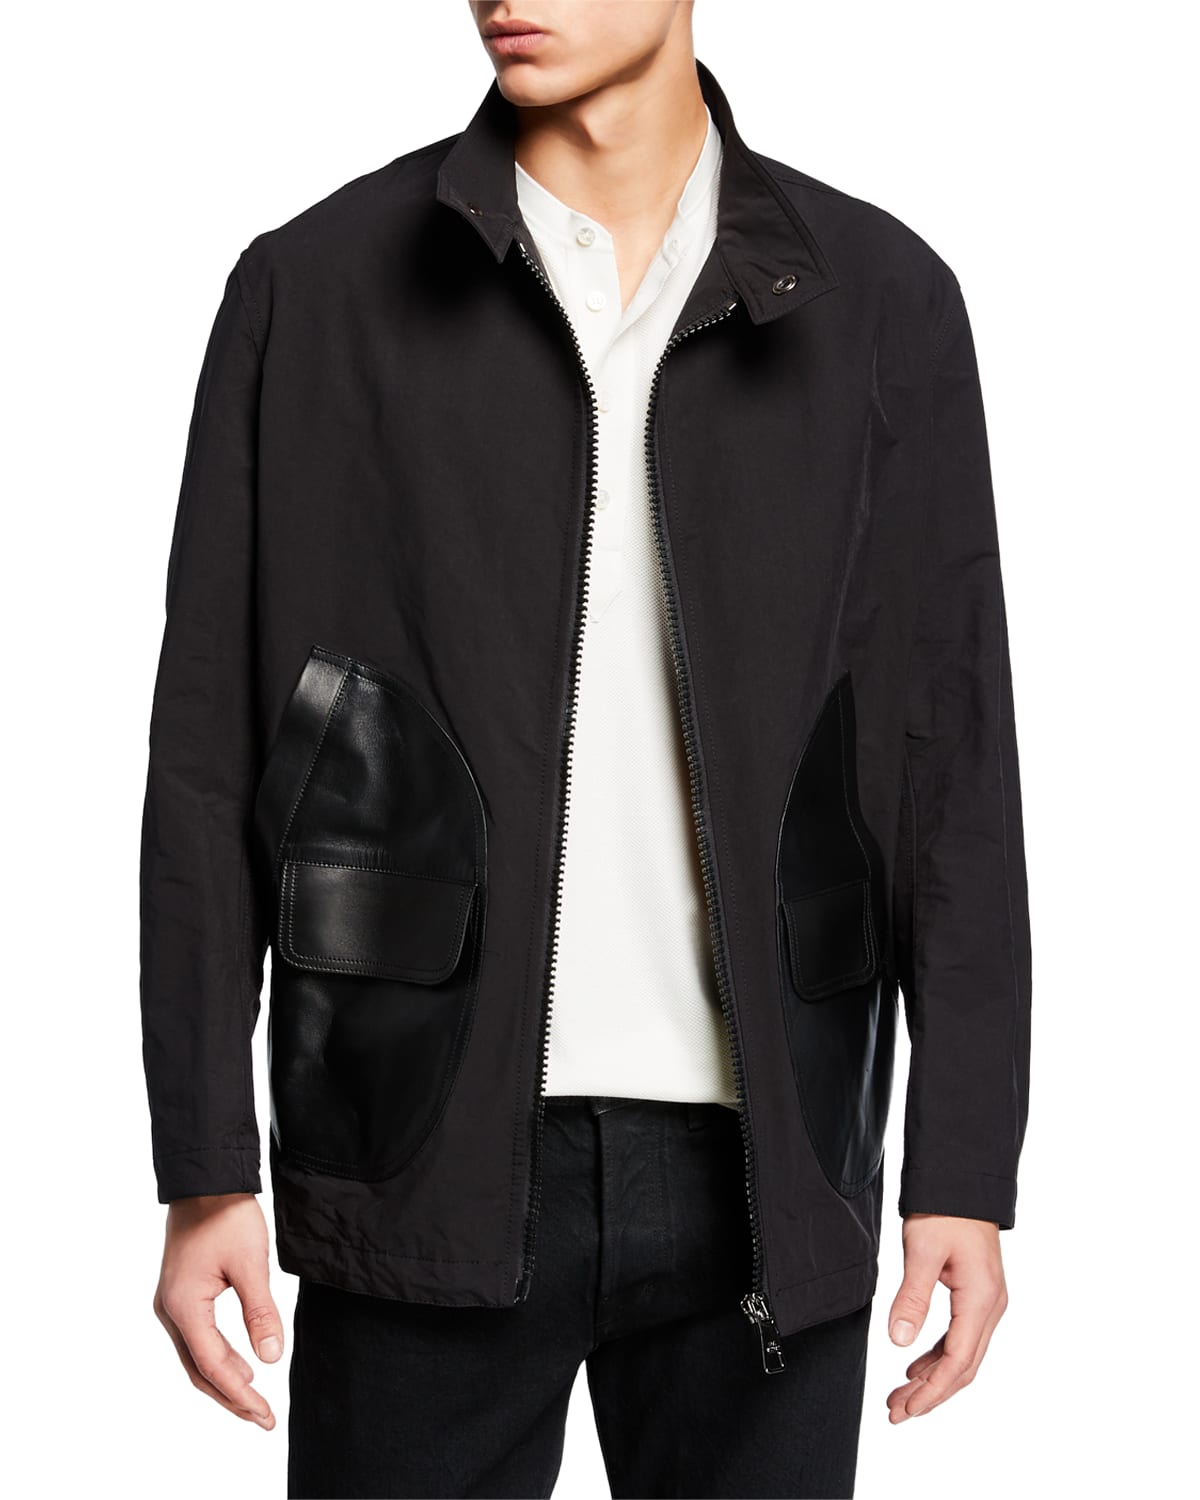 Neil Barrett Men's Zip-Front Bomber Jacket with Leather Pockets